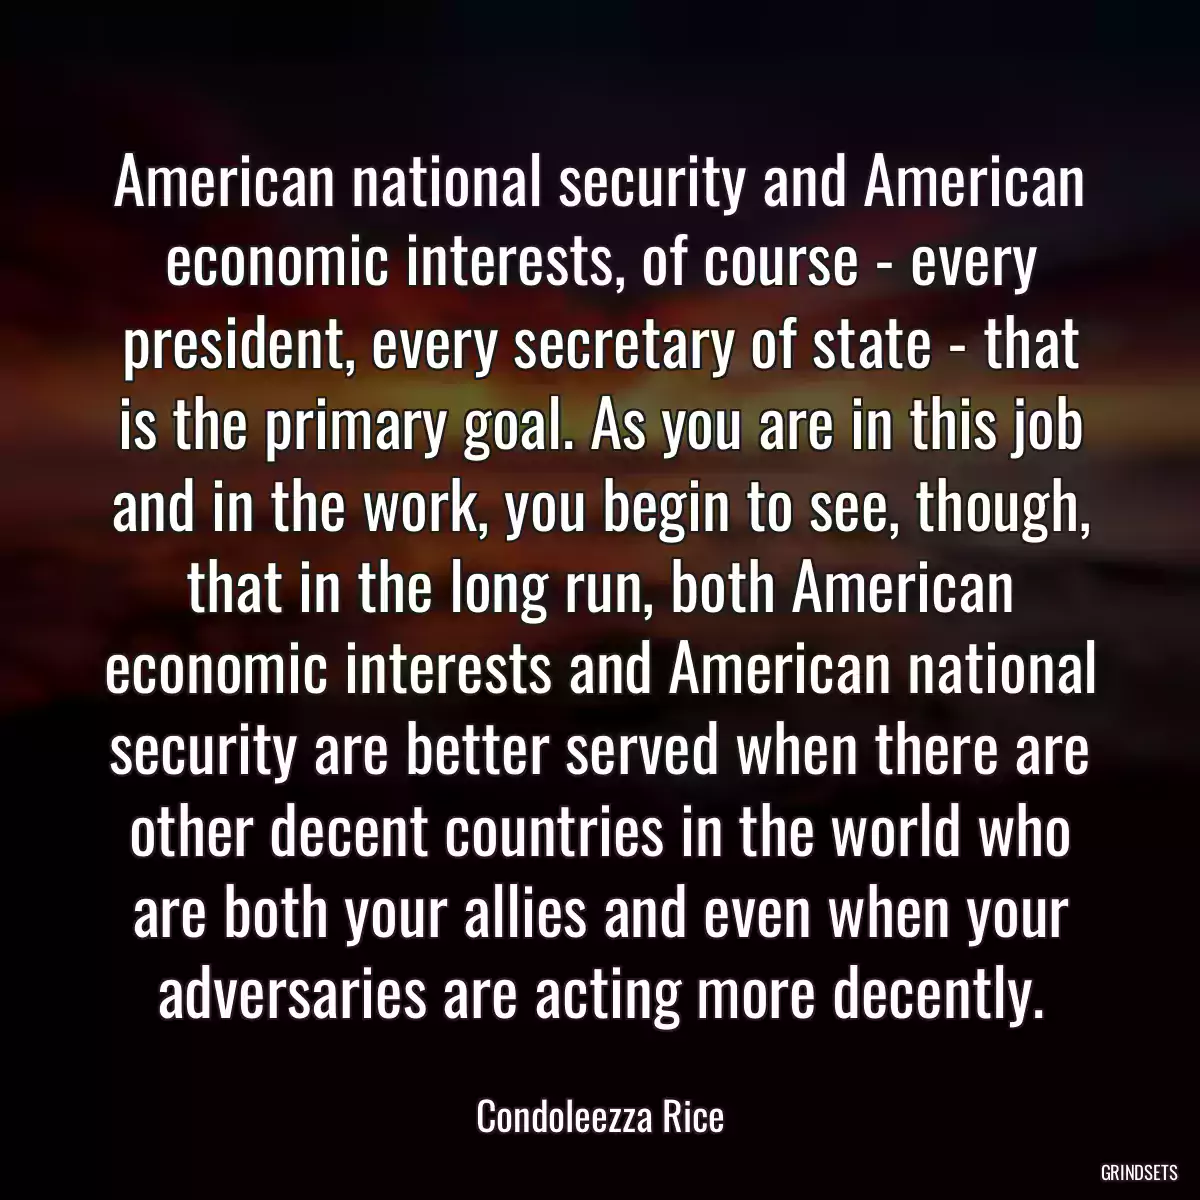 American national security and American economic interests, of course - every president, every secretary of state - that is the primary goal. As you are in this job and in the work, you begin to see, though, that in the long run, both American economic interests and American national security are better served when there are other decent countries in the world who are both your allies and even when your adversaries are acting more decently.